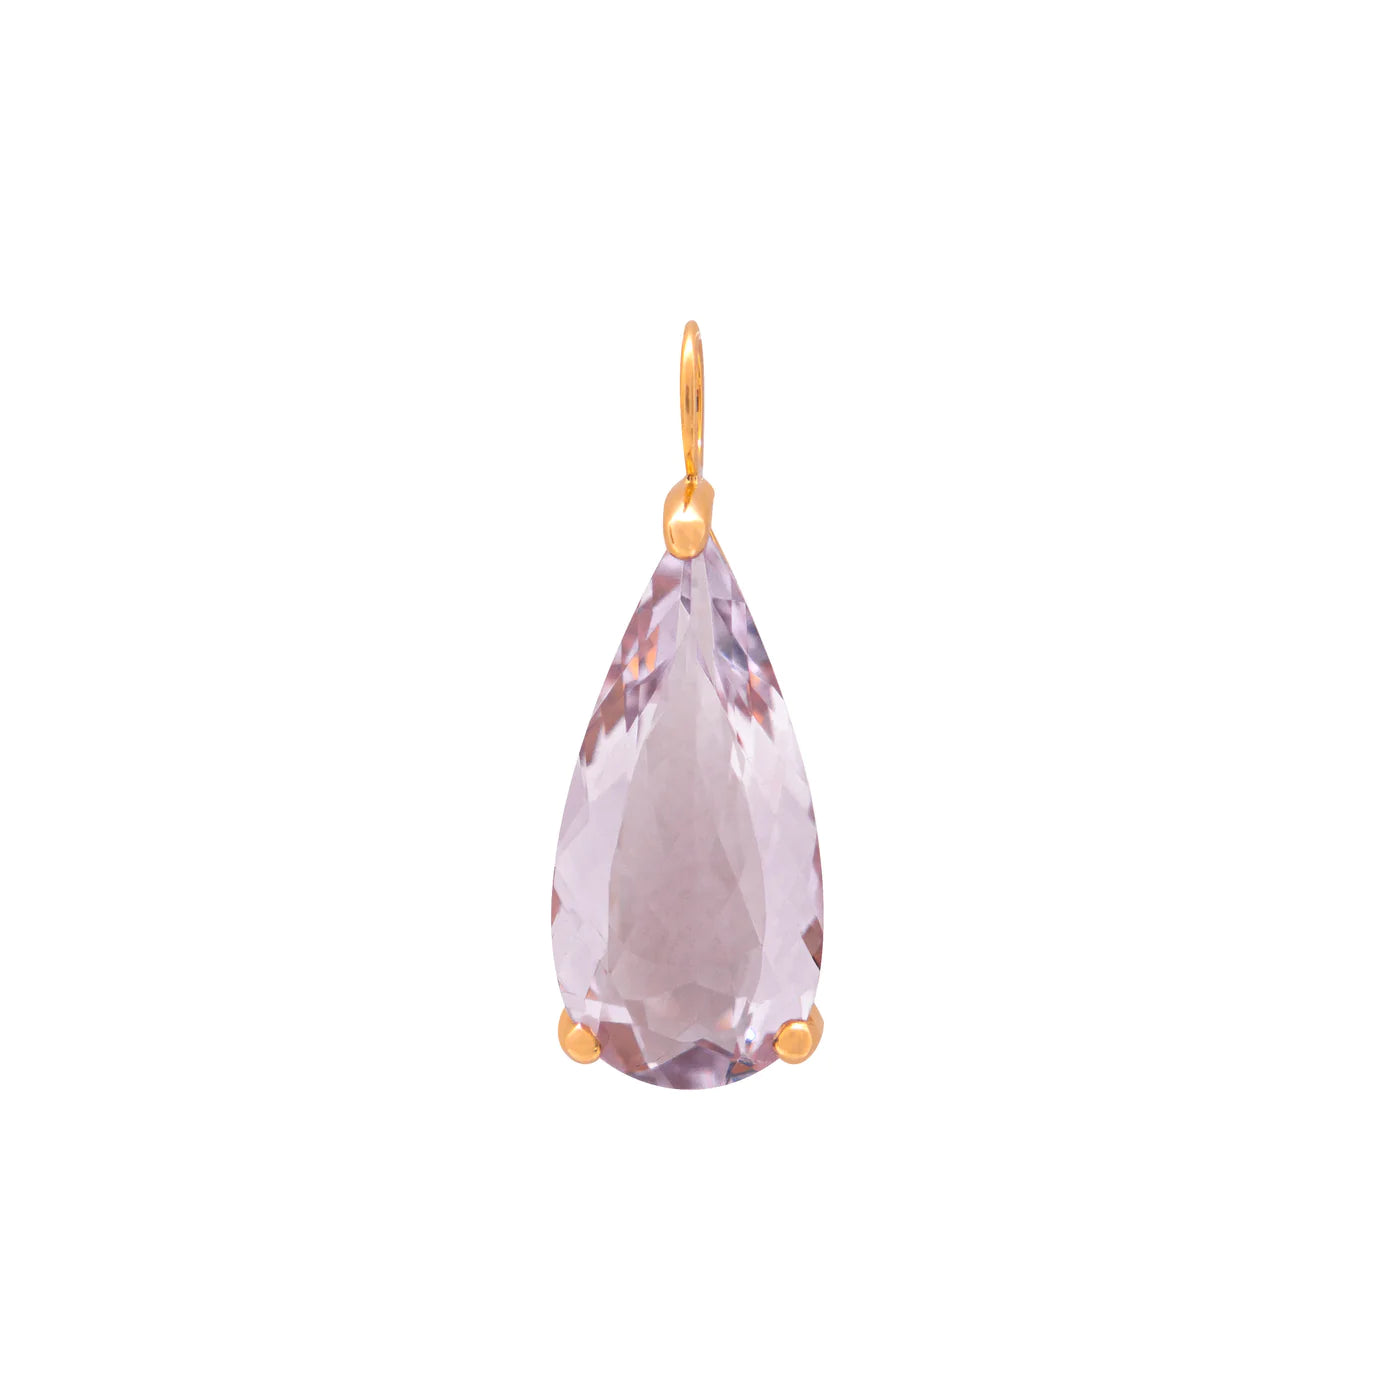 LARGE ROCK DROP PENDANT IN 18K YELLOW GOLD PLATED SILVER WITH AMETHYST